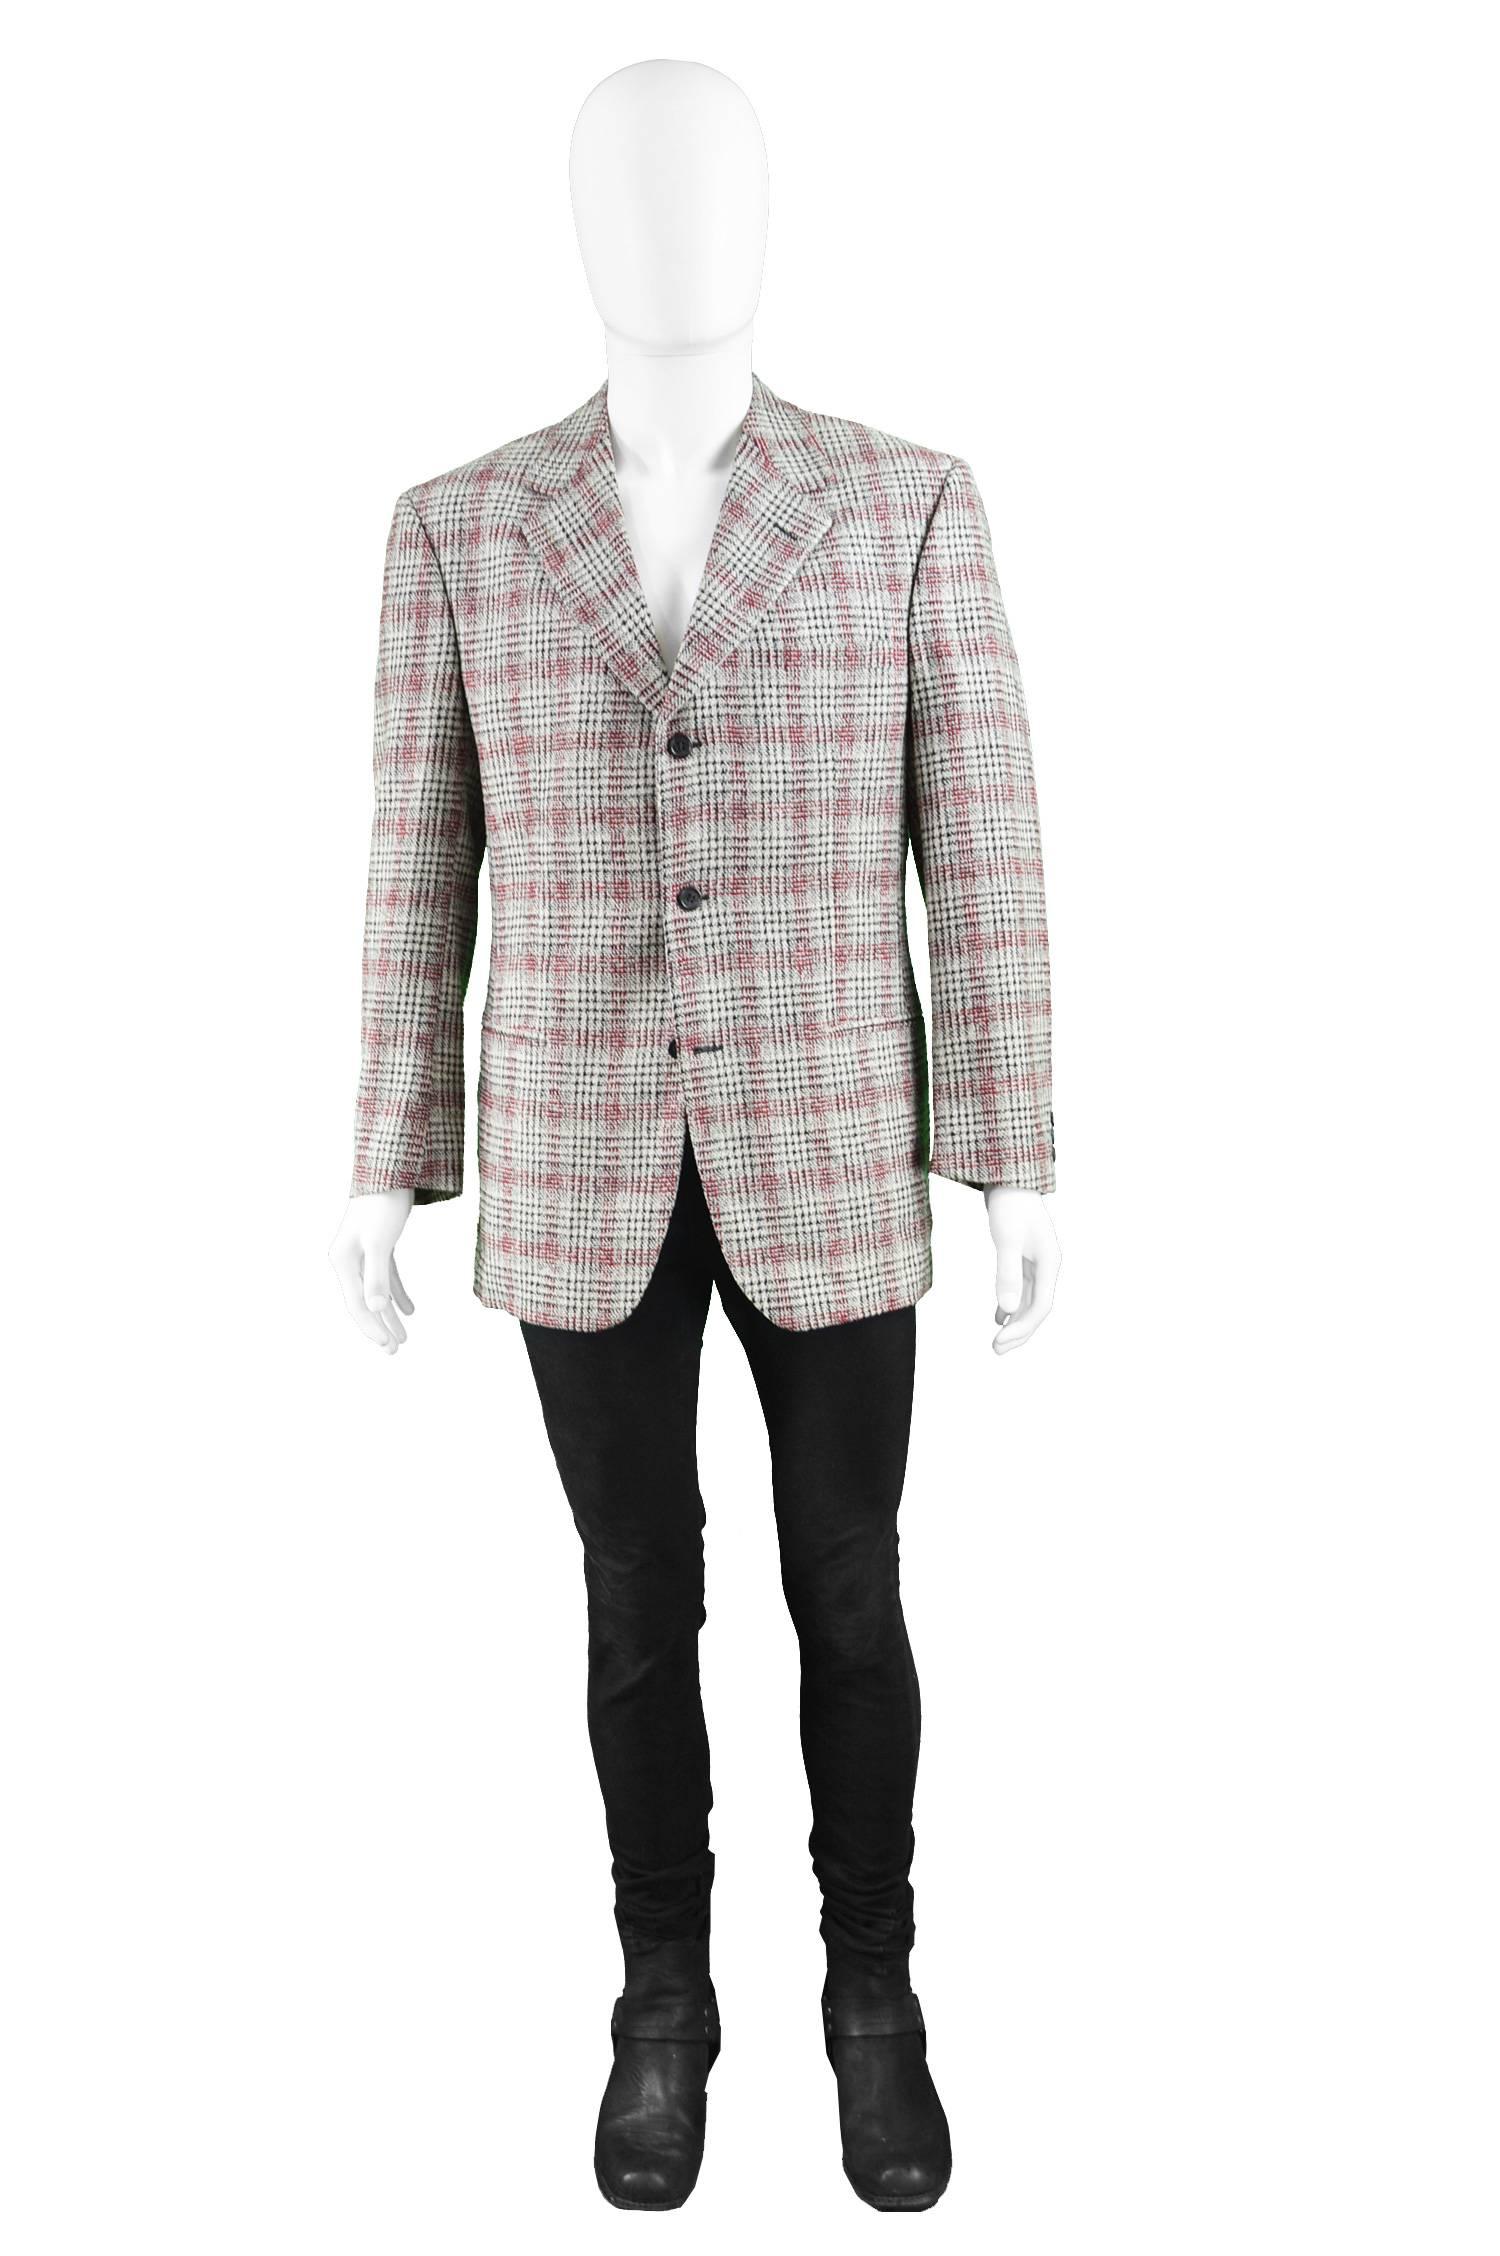 Versace Classic V2 Vintage Mens Black, White & Red Wool Checked Sport Coat, 1990s

An excellent vintage men's blazer from the 90s by legendary Italian fashion designer, Gianni Versace for the Classic V2 line, which was a men's line designed by